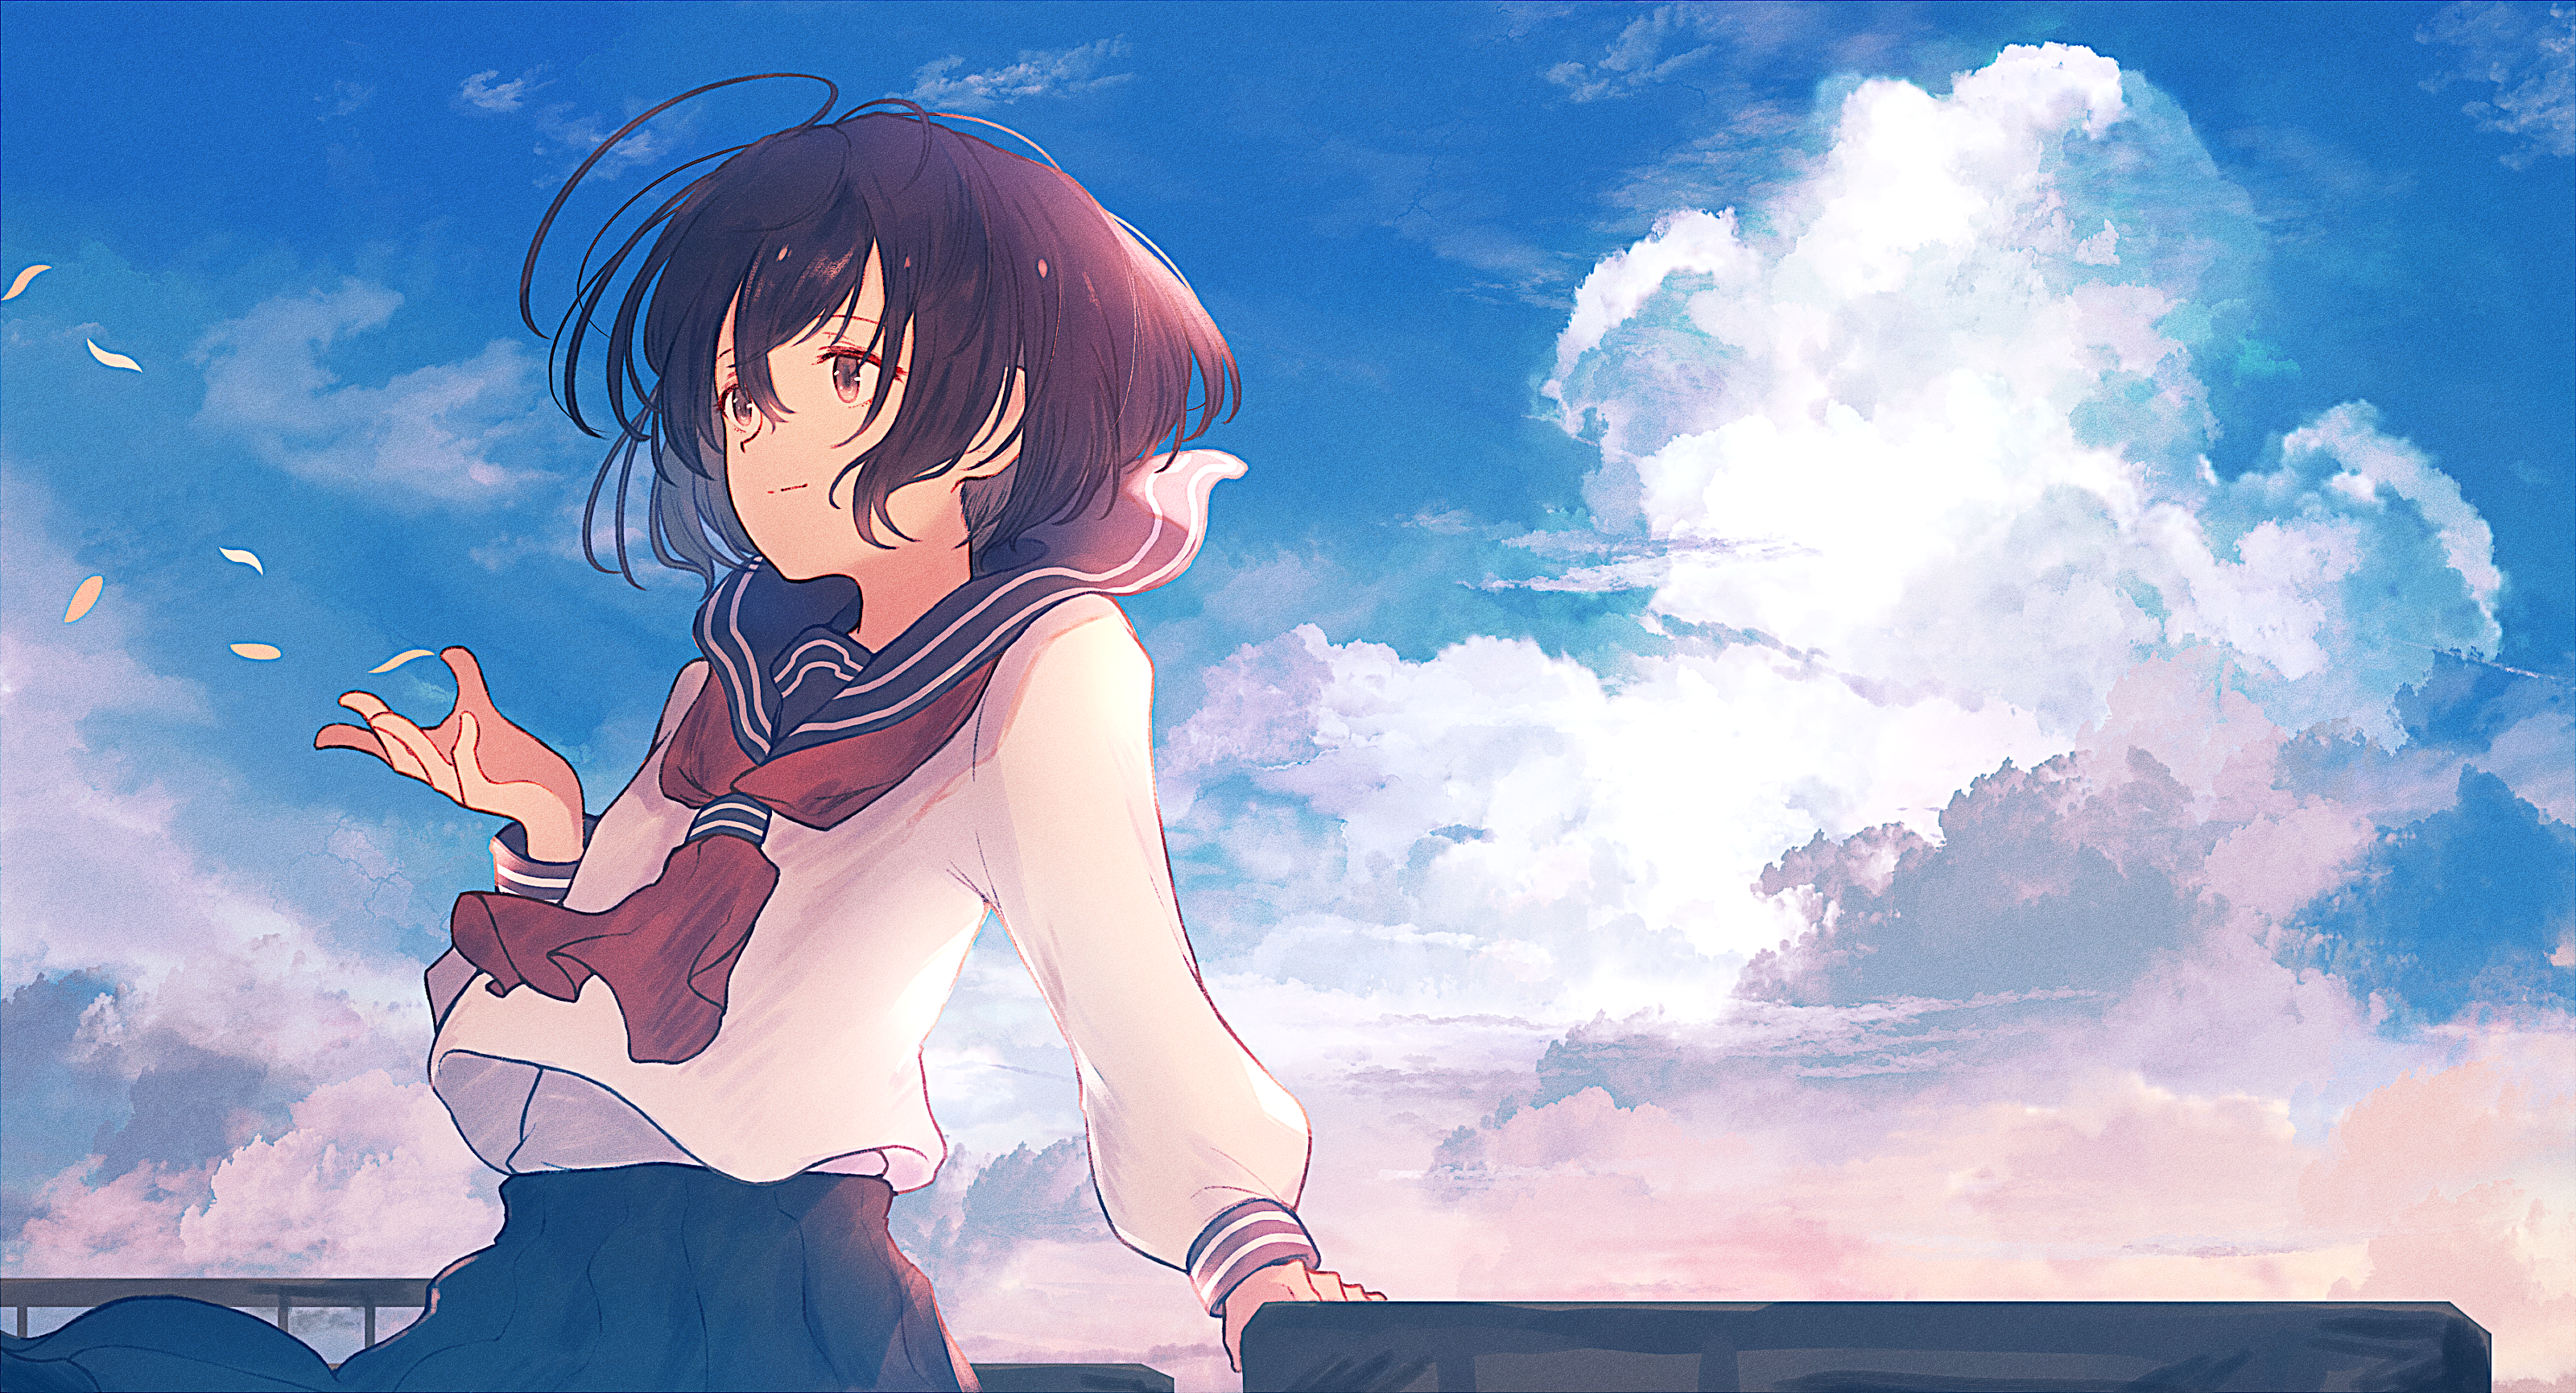 Run With The Wind Will Make You Fall In love With Running – It's About Anime